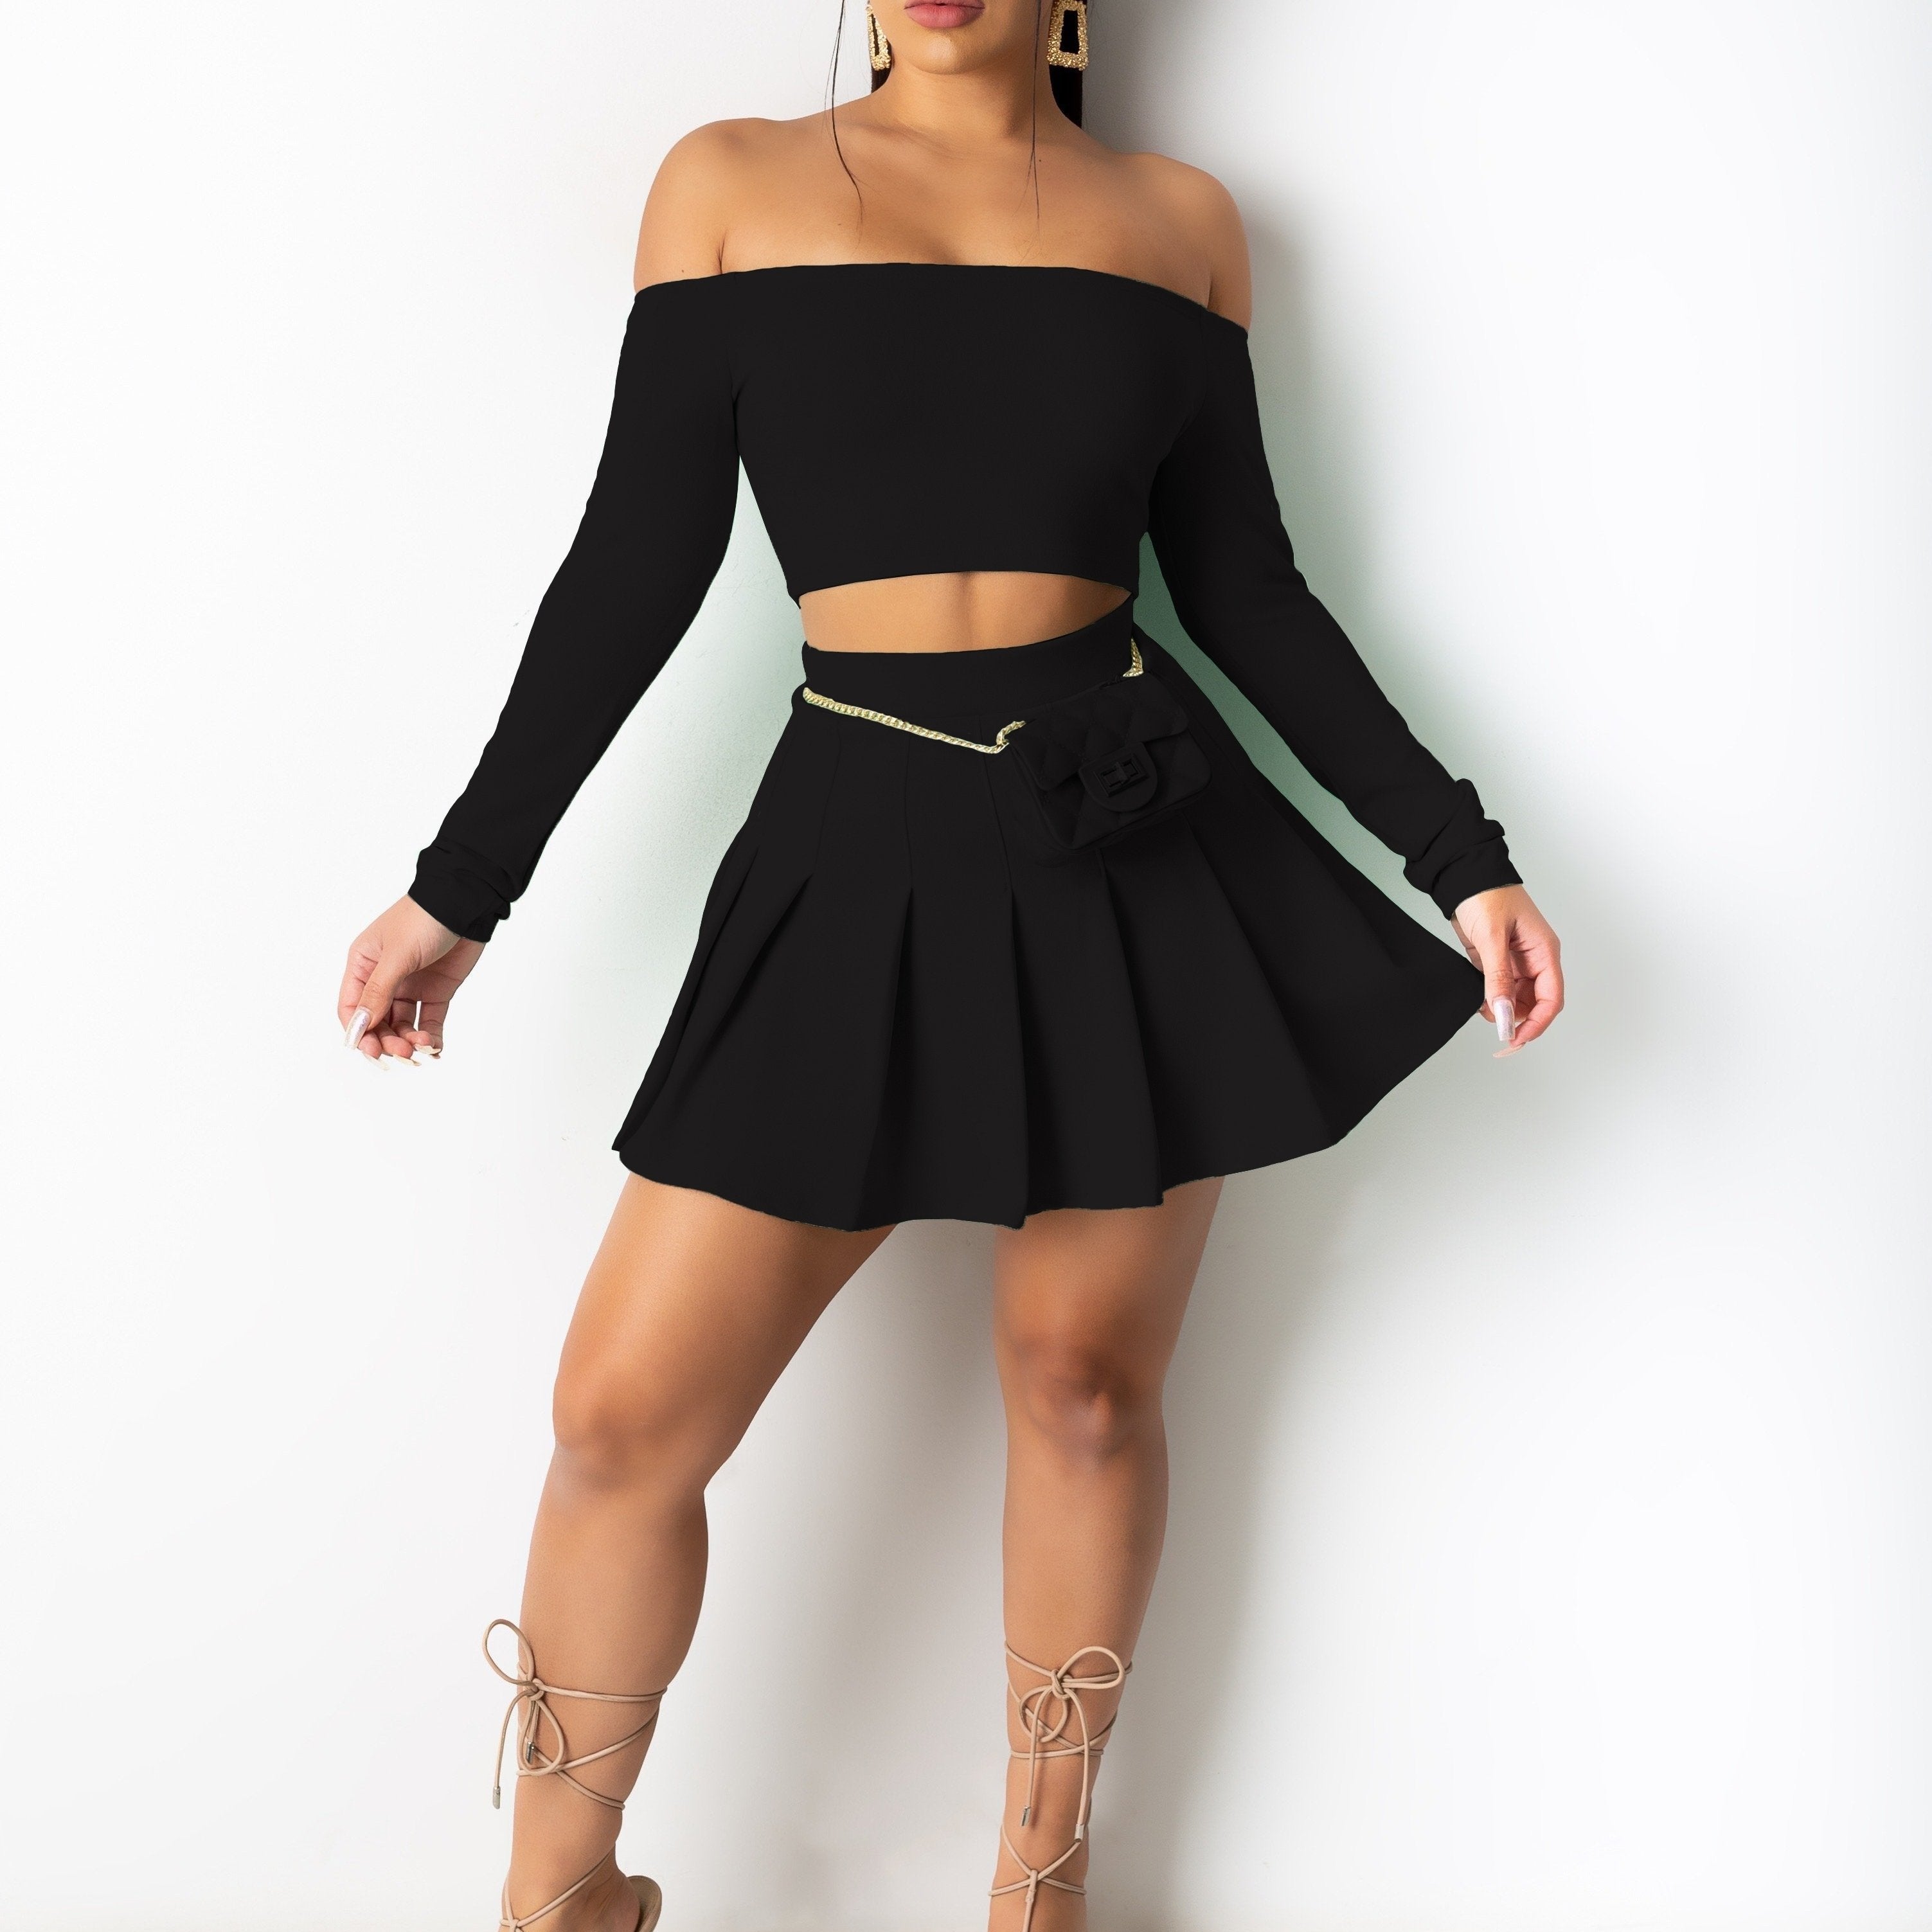 vlovelaw  Solid Elegant Two-piece Set, Off Shoulder Long Sleeve Crop Top & Pleated Mini Skirt Outfits, Women's Clothing